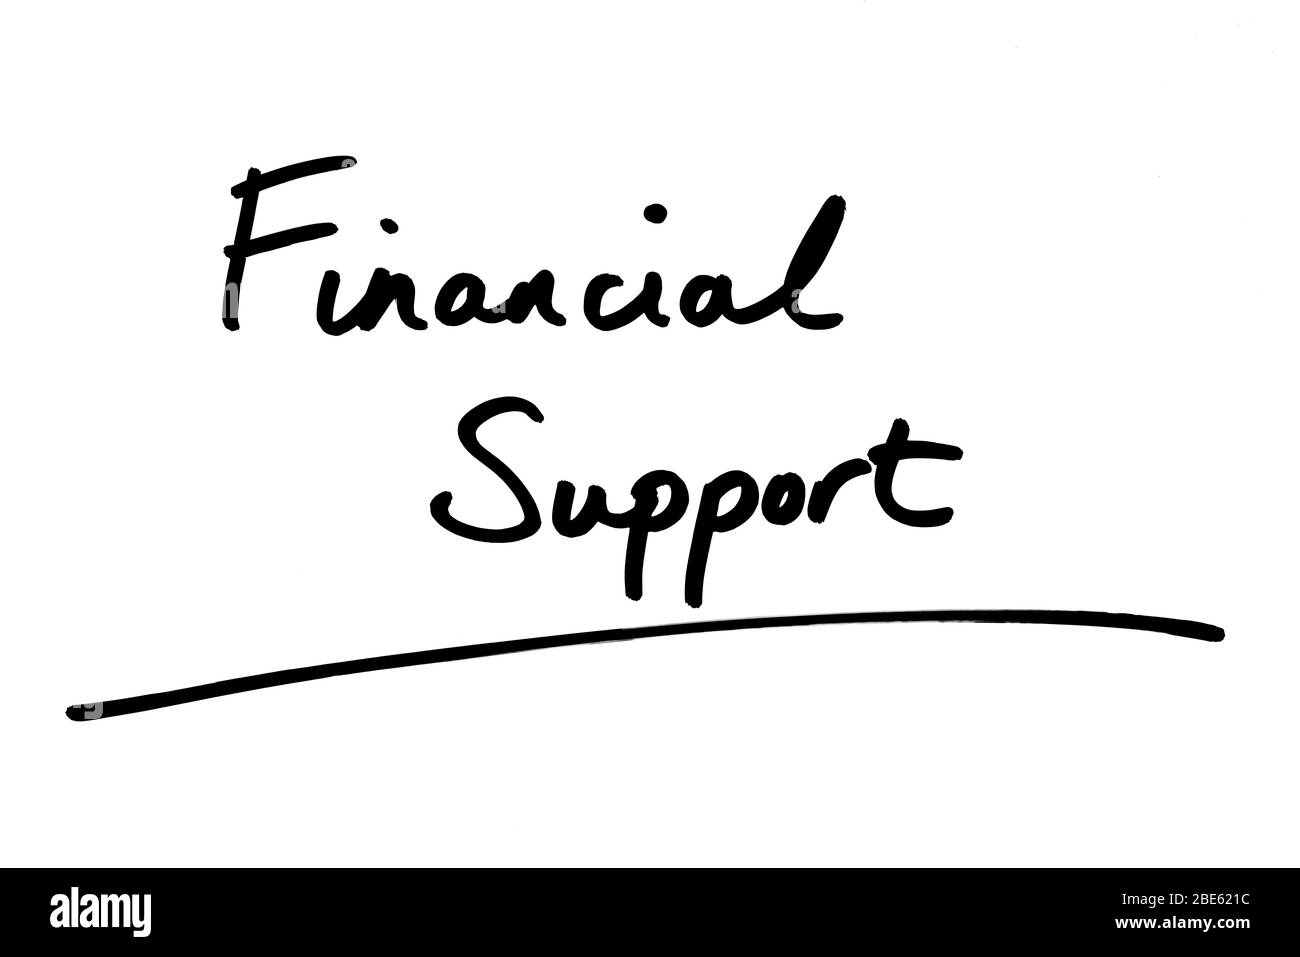 Financial Support handwritten on a white background. Stock Photo